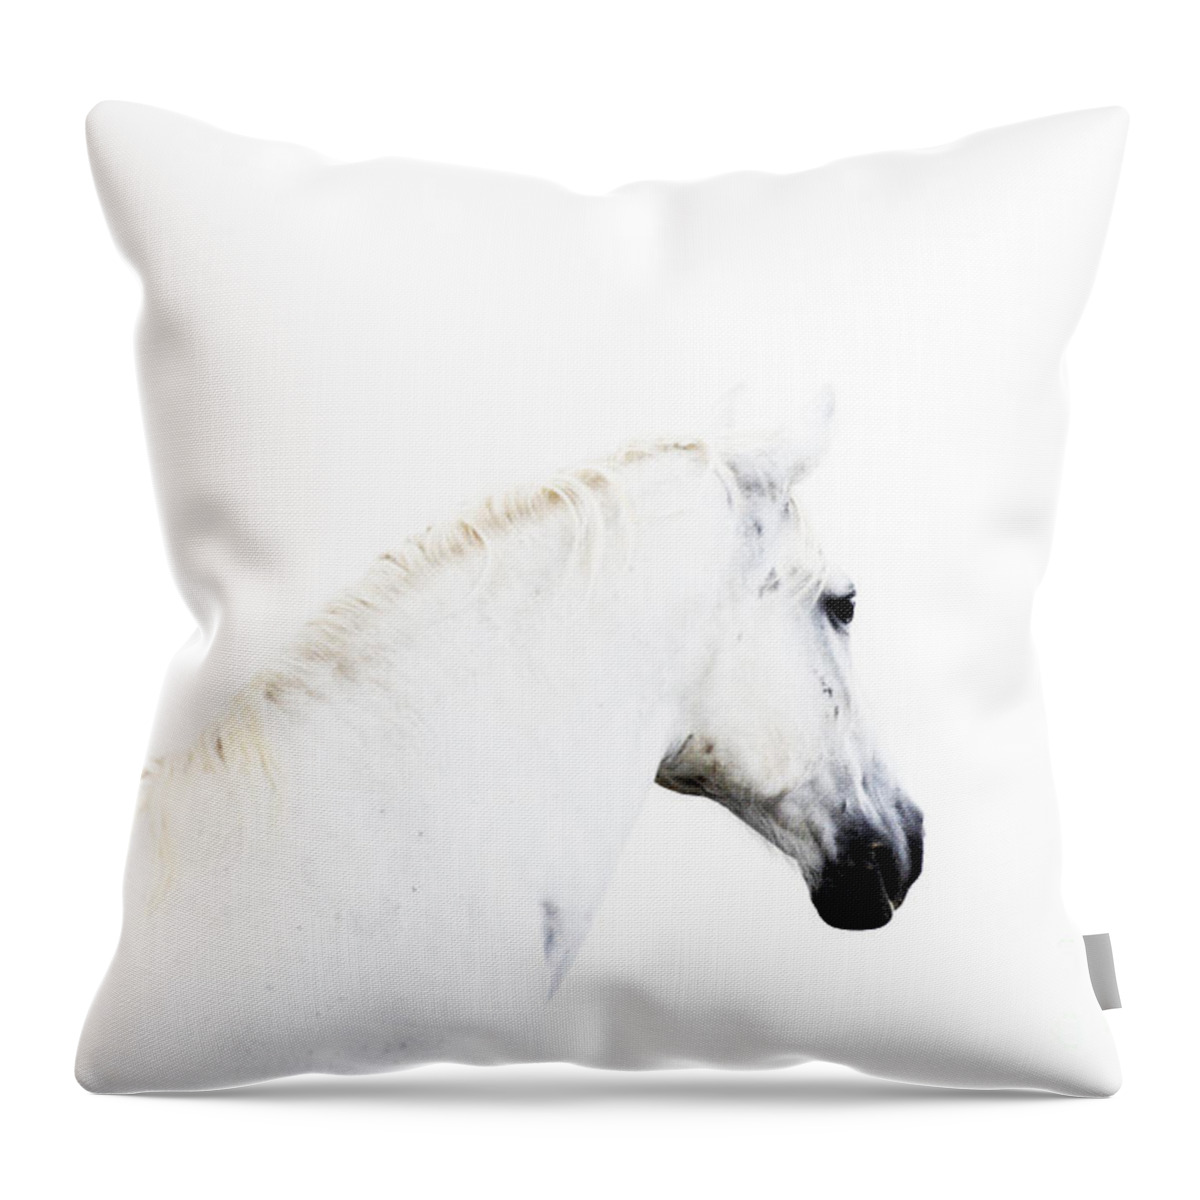 Lipica Stud Throw Pillow featuring the photograph White Beauty of Lipica by Carien Schippers